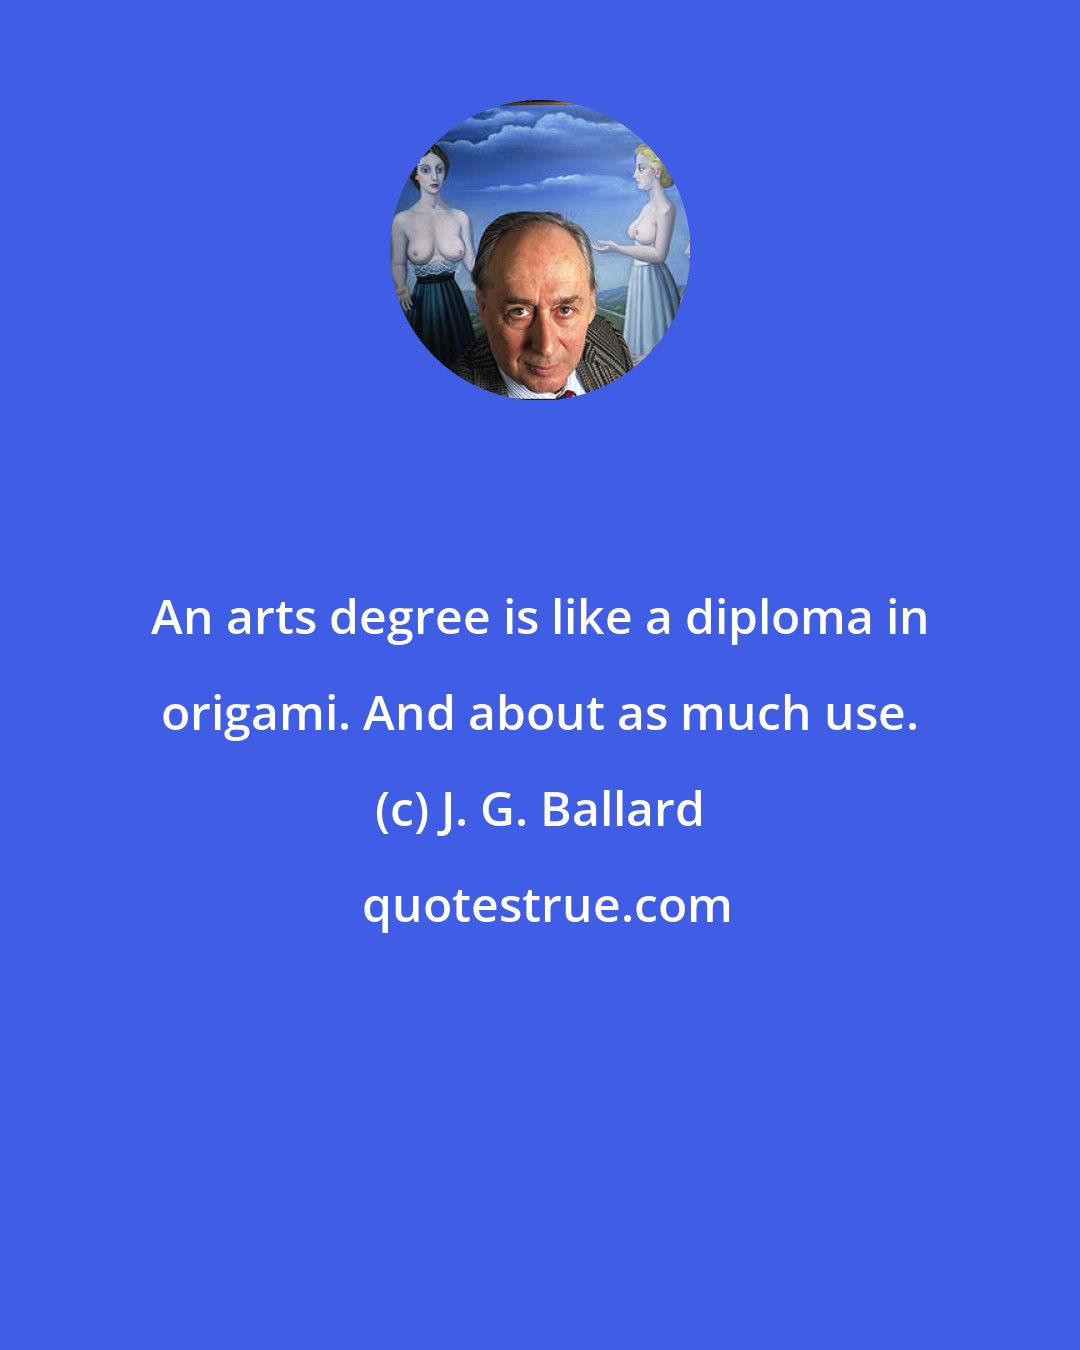 J. G. Ballard: An arts degree is like a diploma in origami. And about as much use.